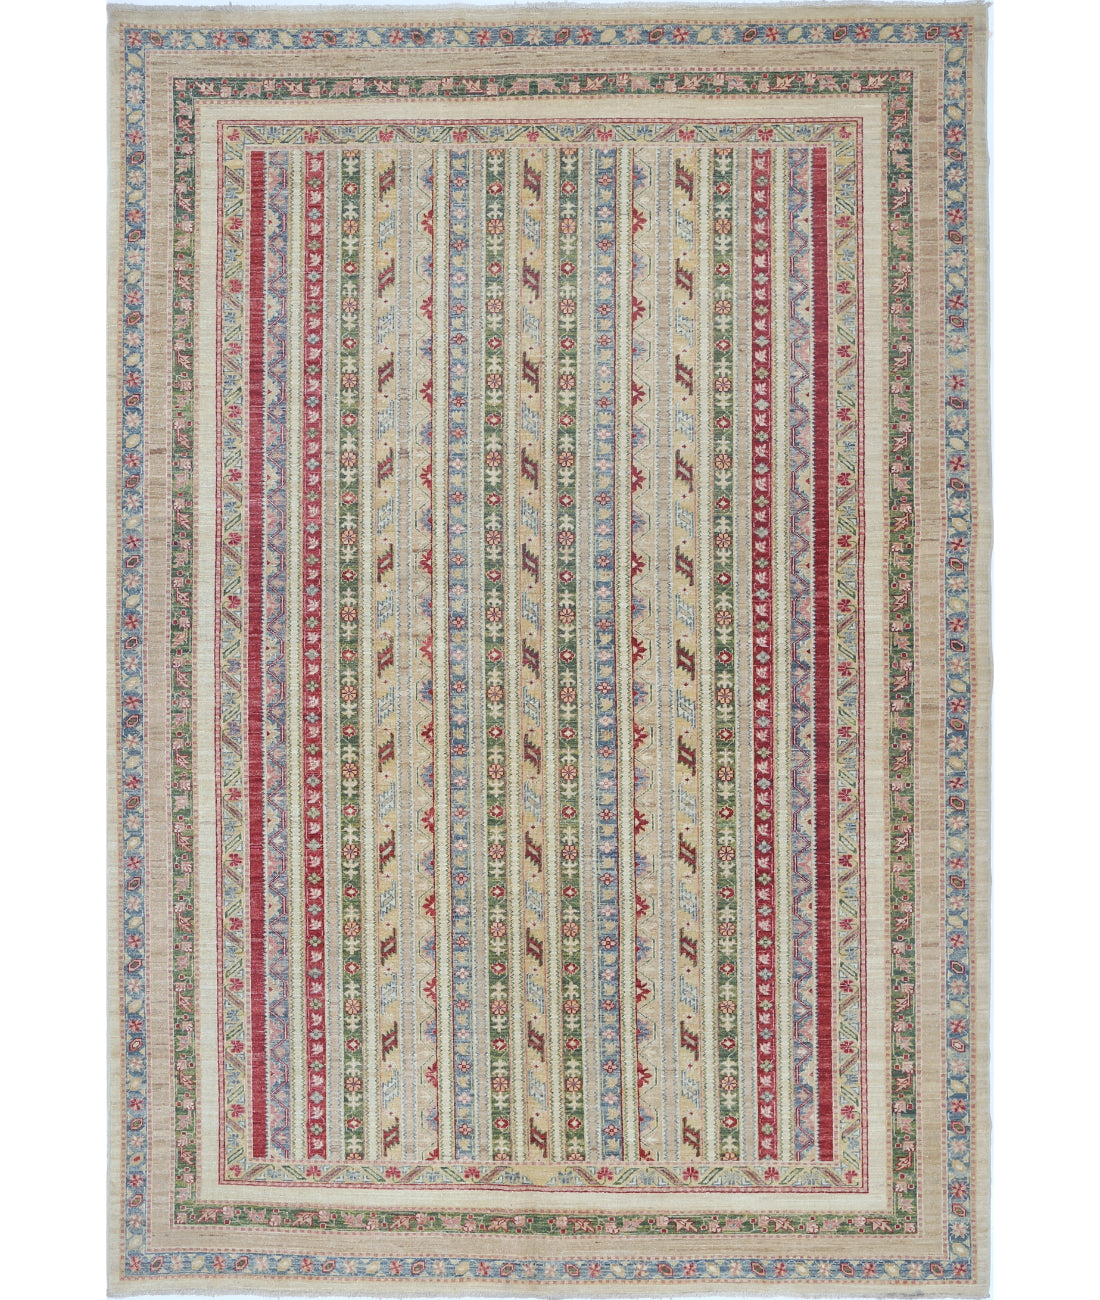 Hand Knotted Shaal Wool Rug - 6'9'' x 9'9'' 6'9'' x 9'9'' (203 X 293) / Multi / Multi